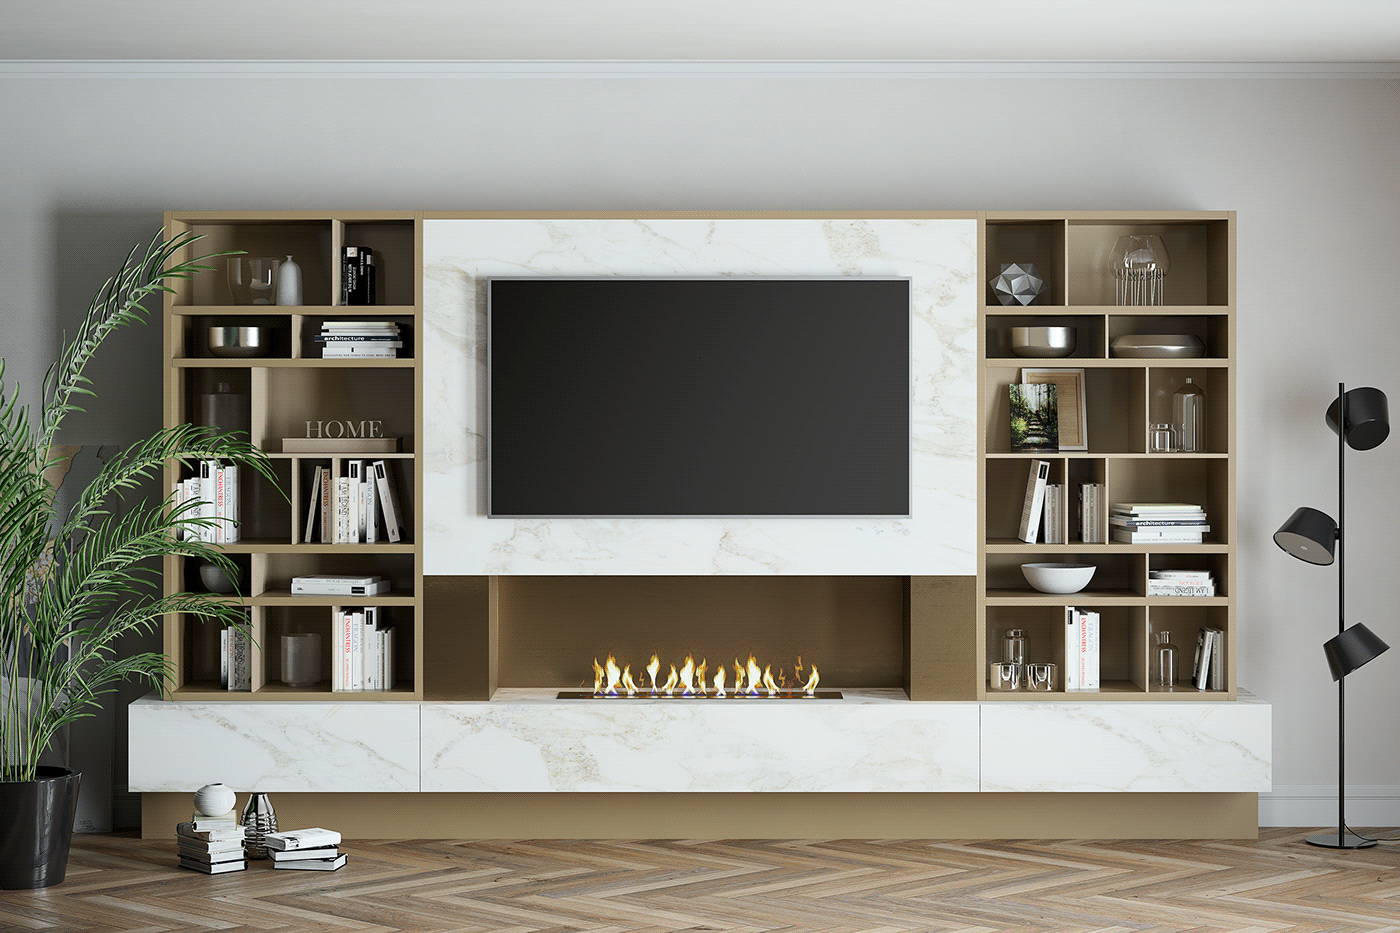 This is a TV furniture whith shelves, lights and fire